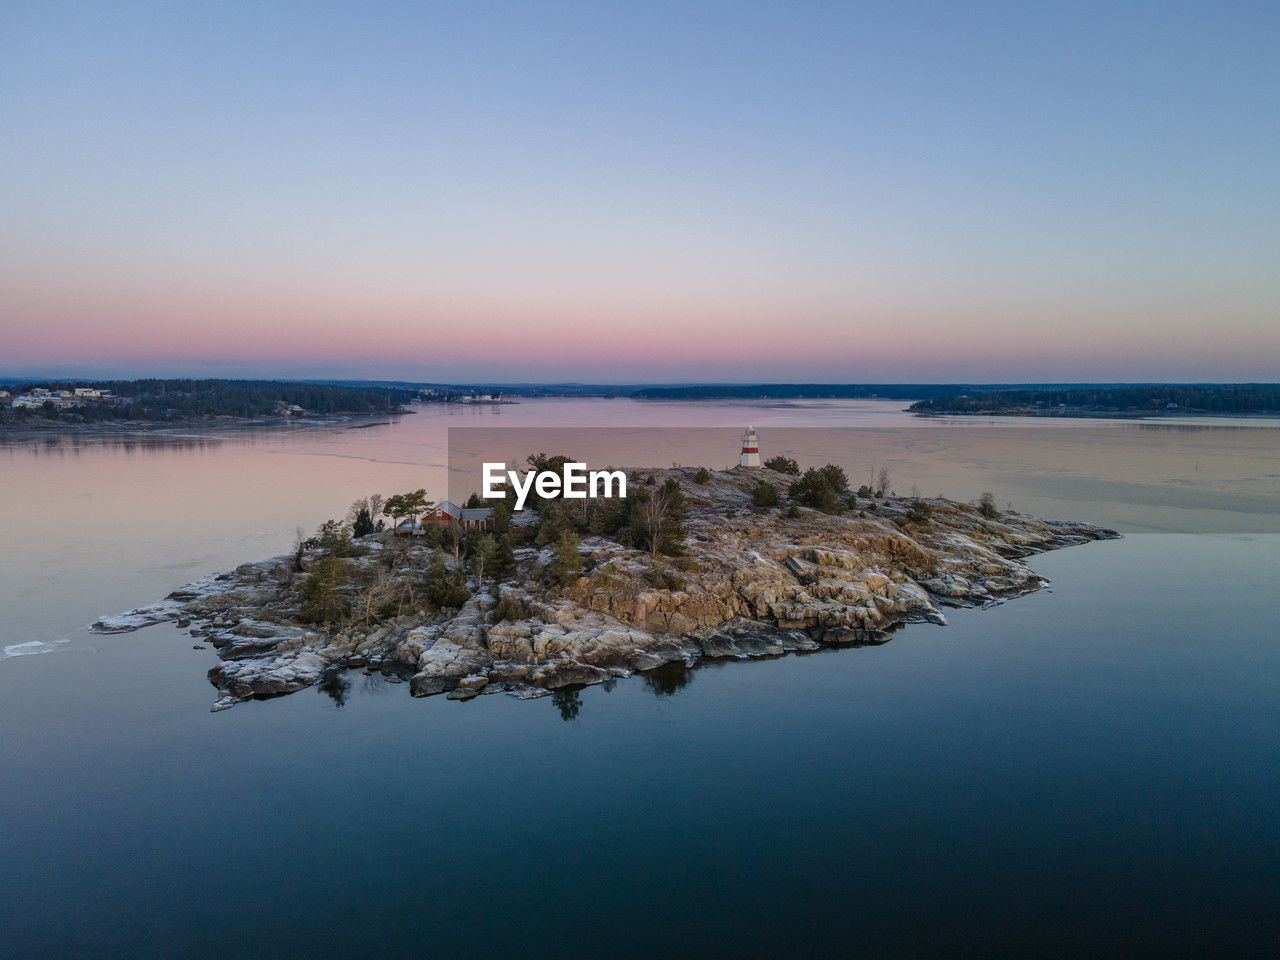 Island with a lighthouse on it in lake vänern